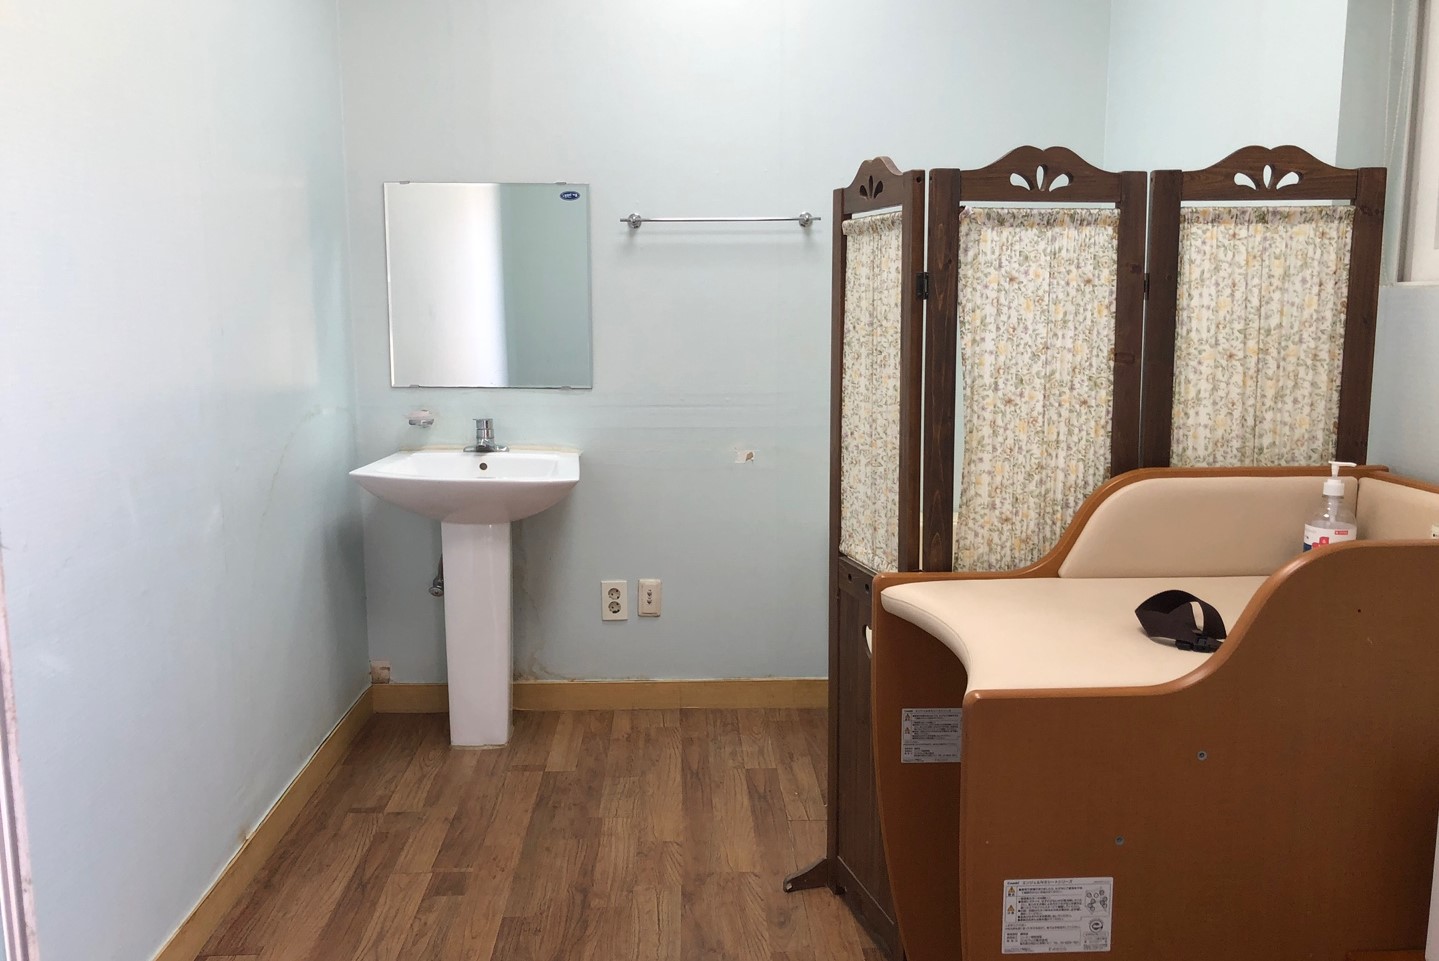 Expecting mothers and children resting area 0 : Inside the nursing room with a partition behind a diaper changing table